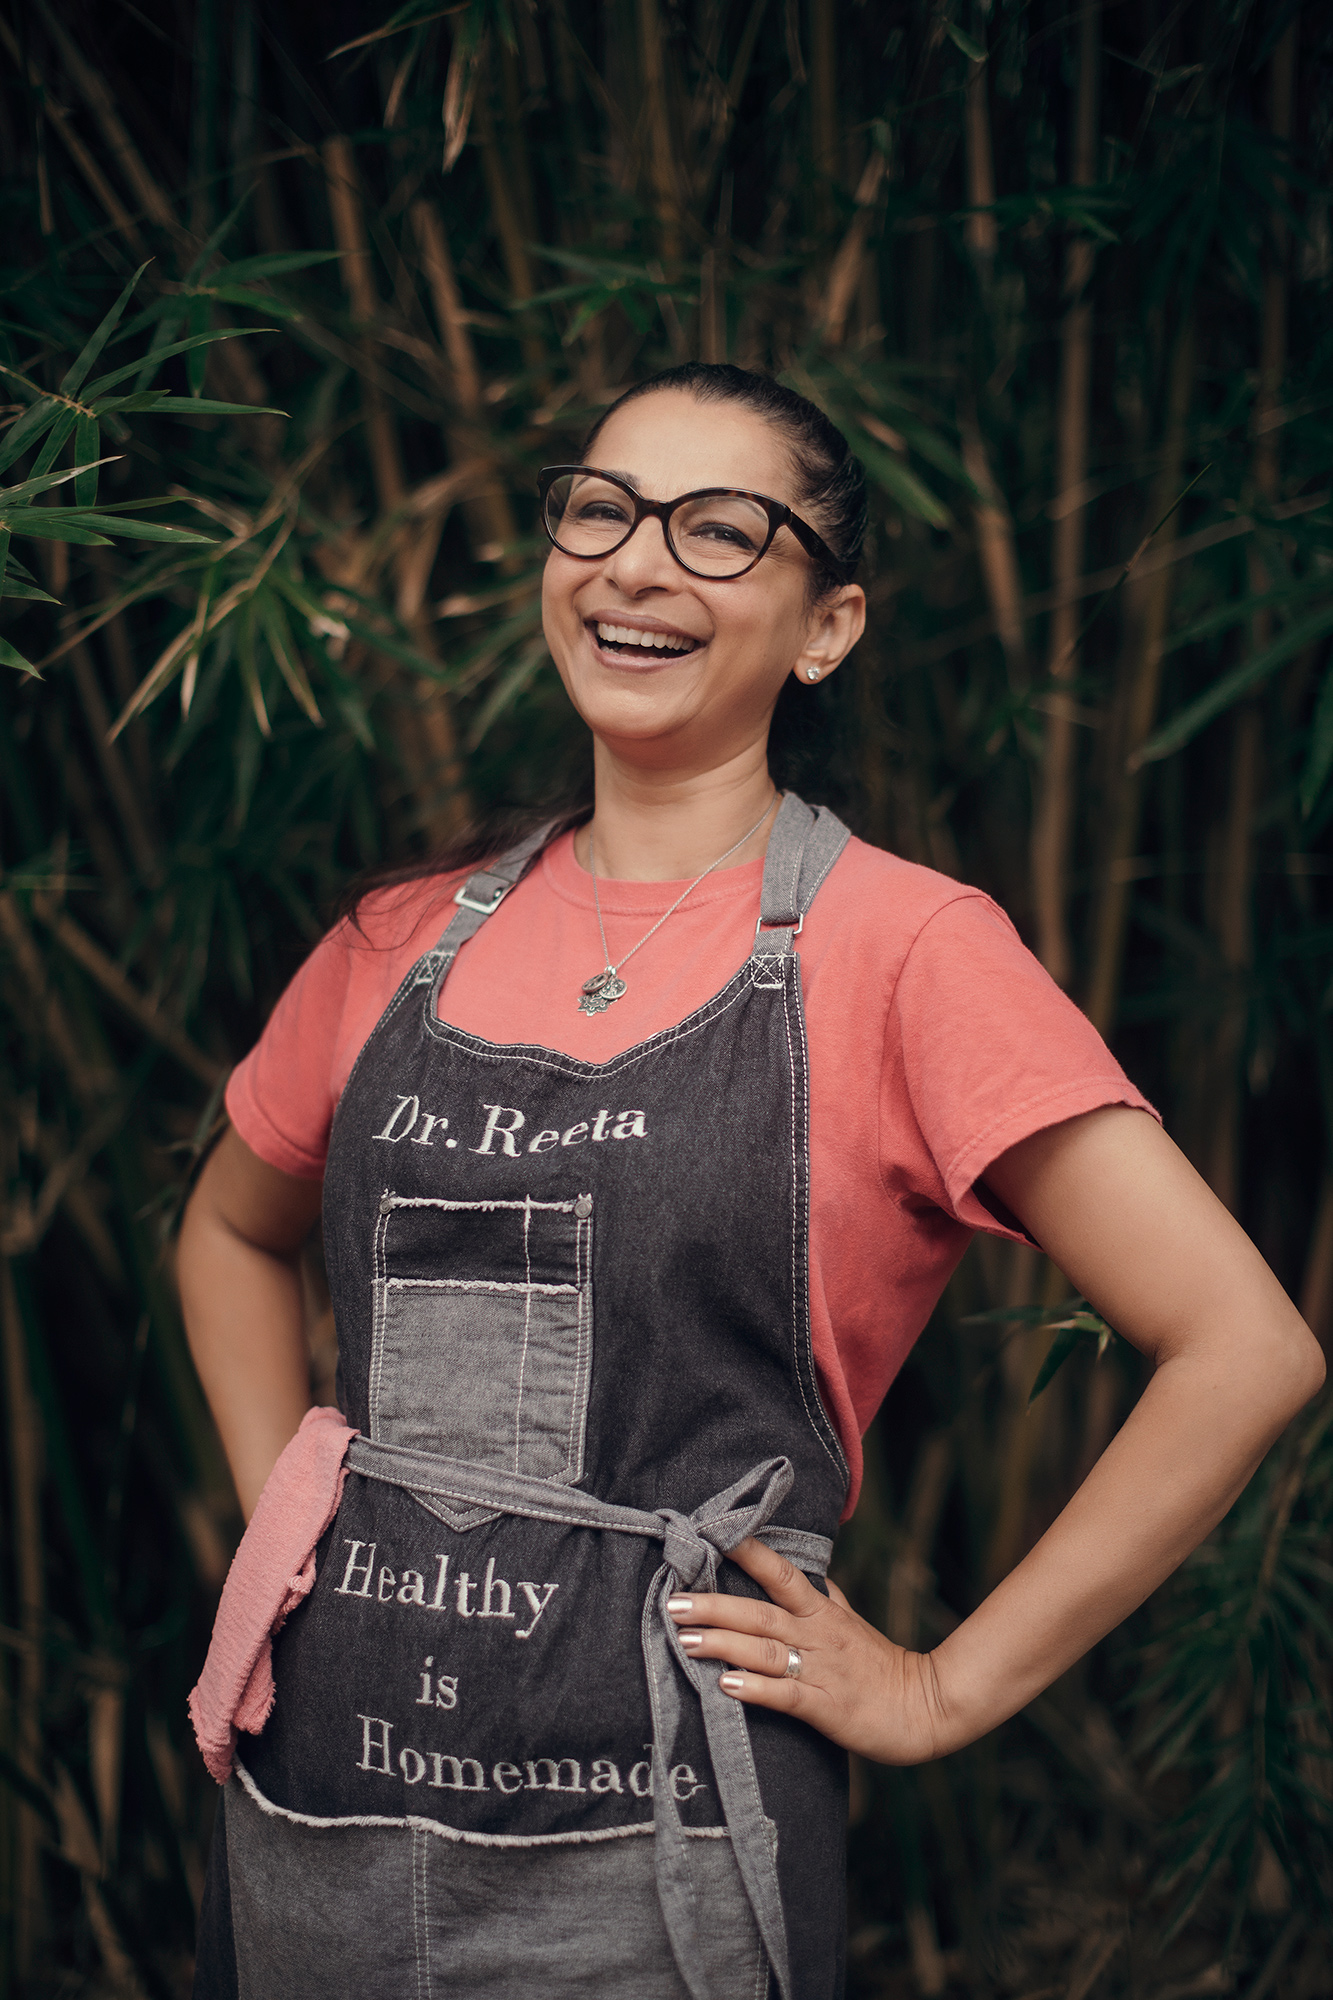 Dr. Madhureeta Achari, neurologist and foodie, photographed on location in Houston, Texas by Houston photographer Todd Spoth.